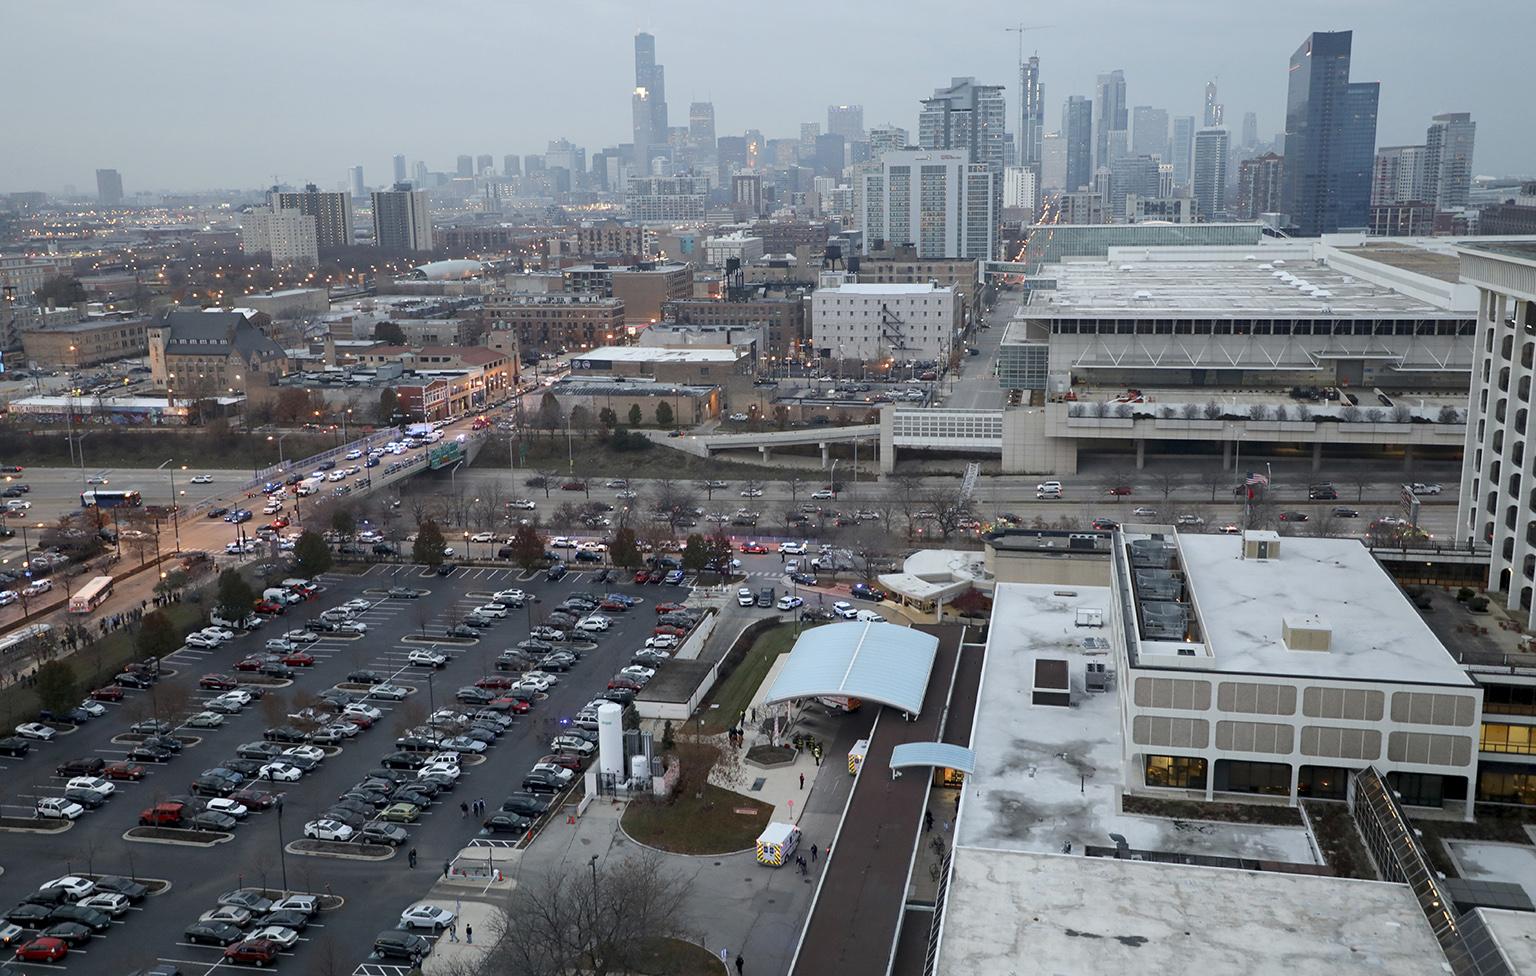 Shots were fired Monday, Nov. 19, 2018, at Mercy Hospital on the city’s South Side, and officers were searching the facility. (Zbigniew Bzdak / Chicago Tribune via AP)